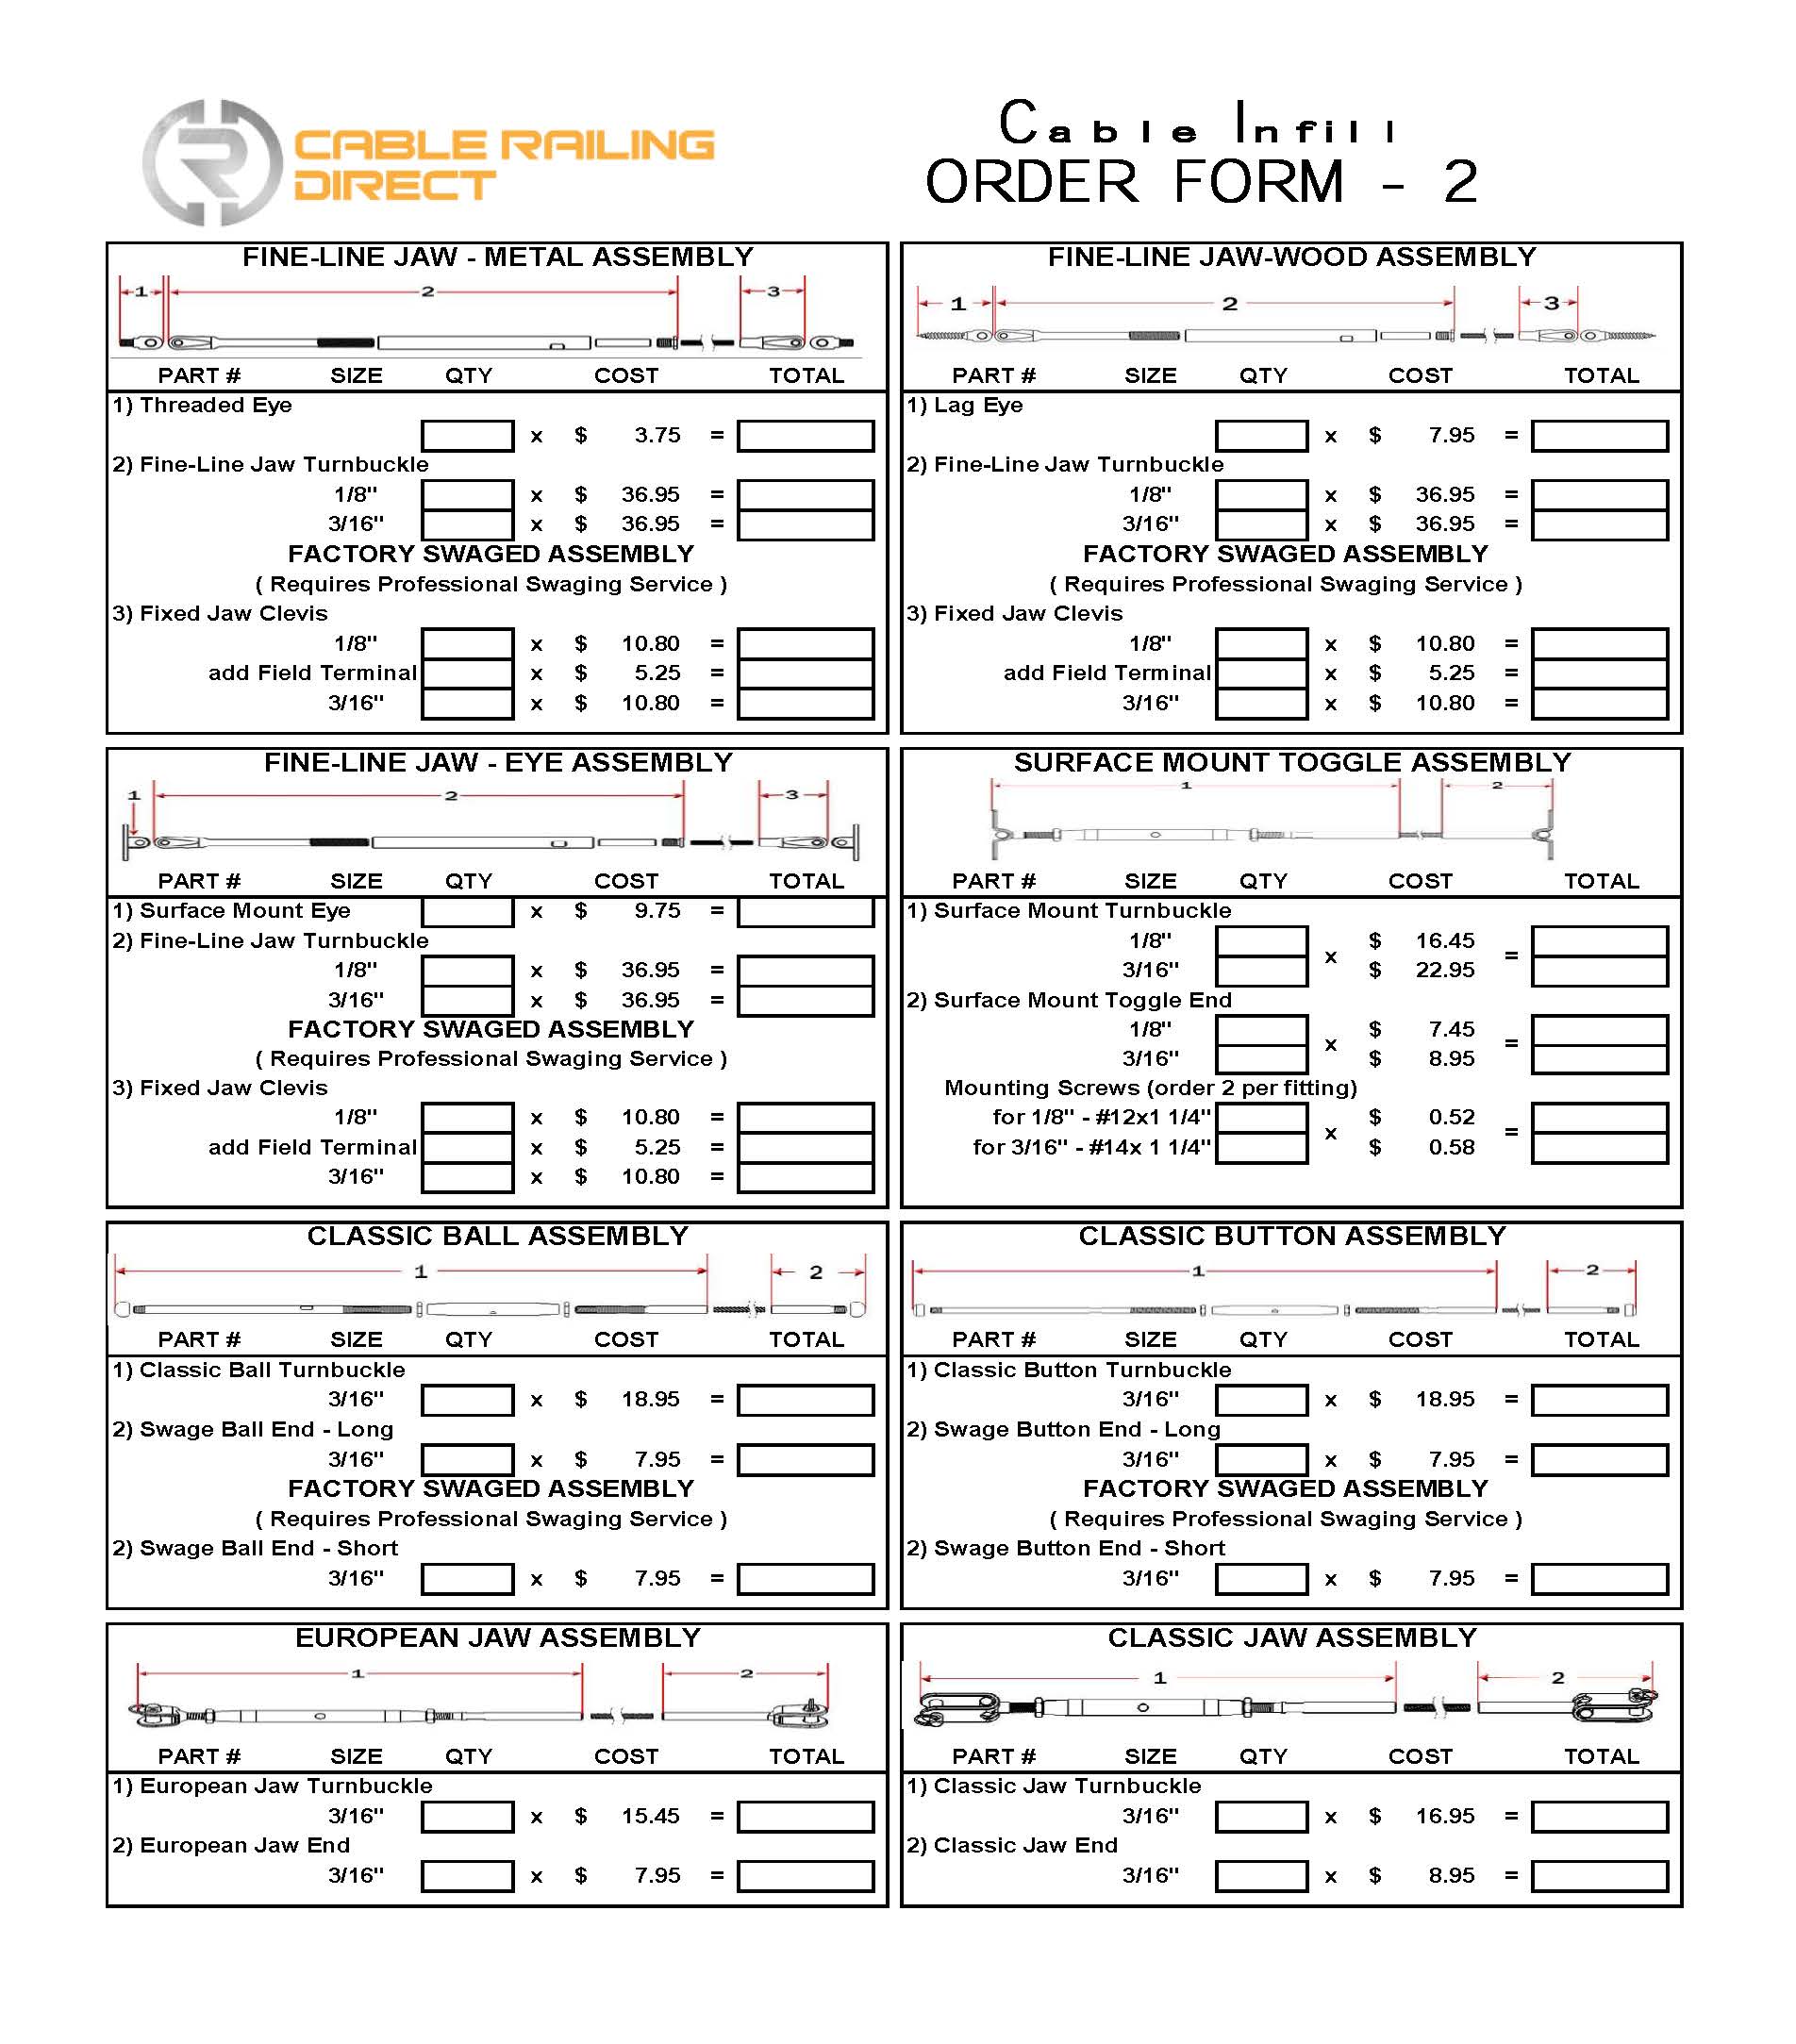 CRD Infill Order Forms Page 2